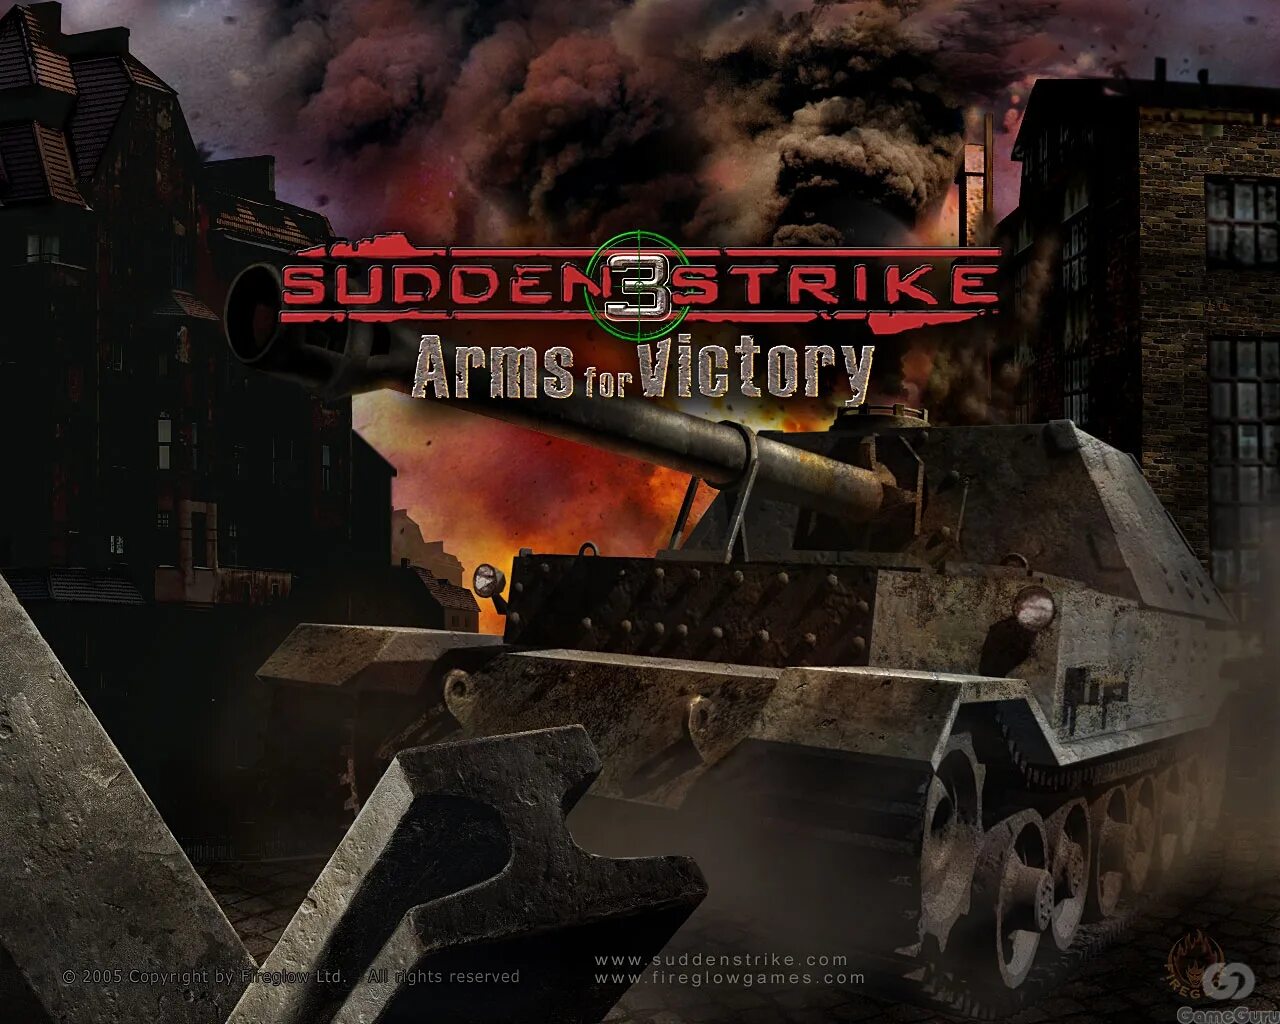 Sudden Strike 3: Arms for Victory. Sudden Strike Arms for Victory. Sudden Strike 3: Arms for Victory обложка. Sudden Strike 3 обложка.